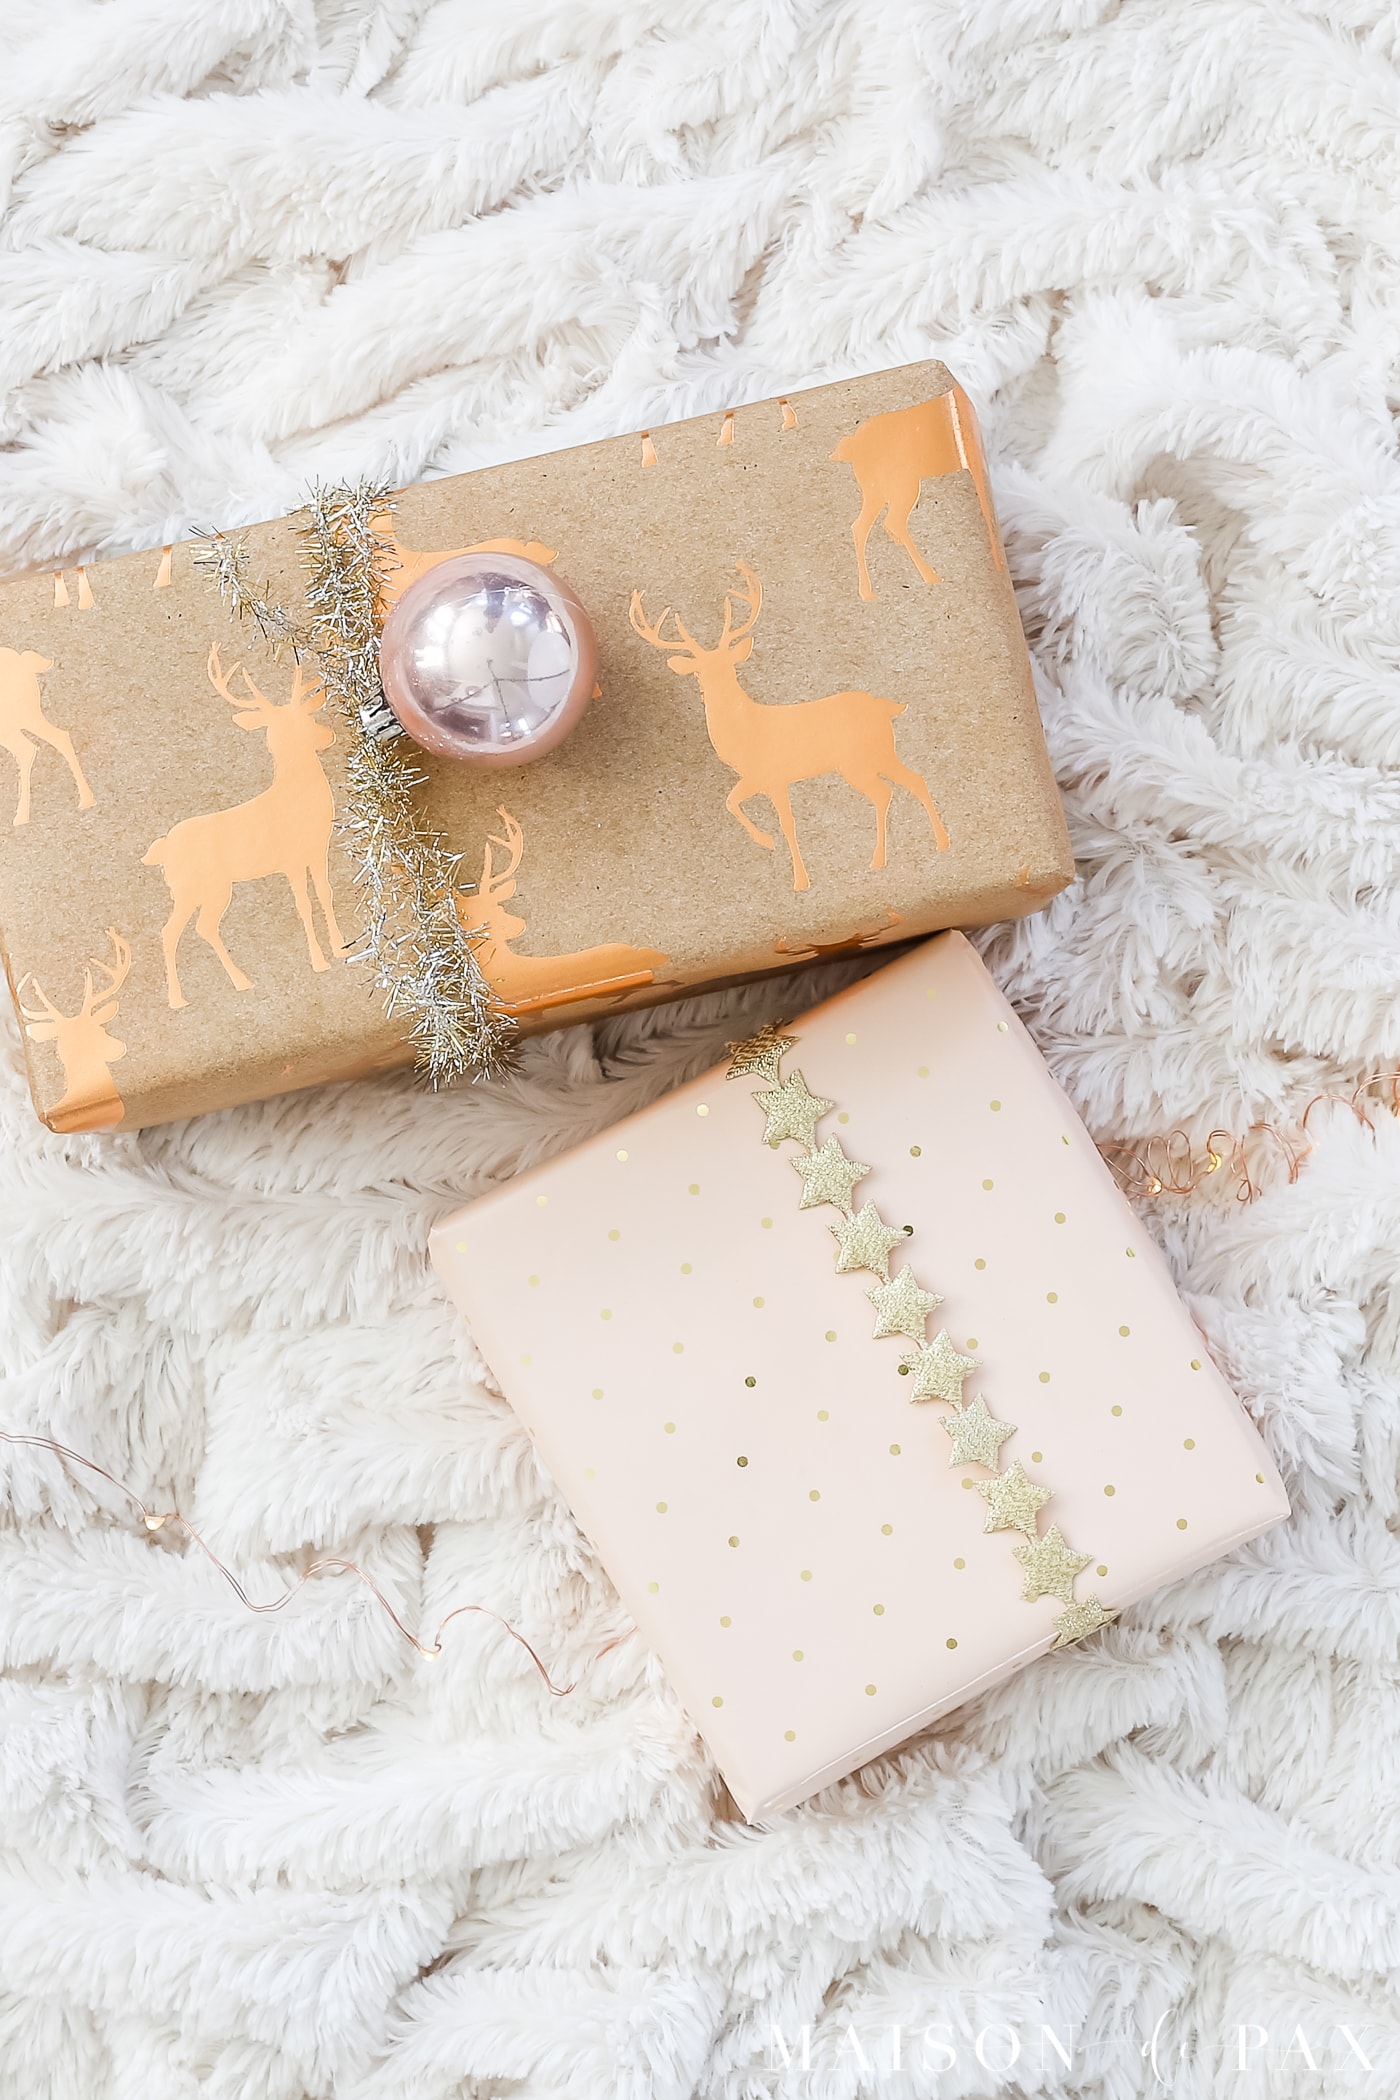 easy gift wrapping ideas: add mini ornaments to your gifts #christmaspresents #giftwrap